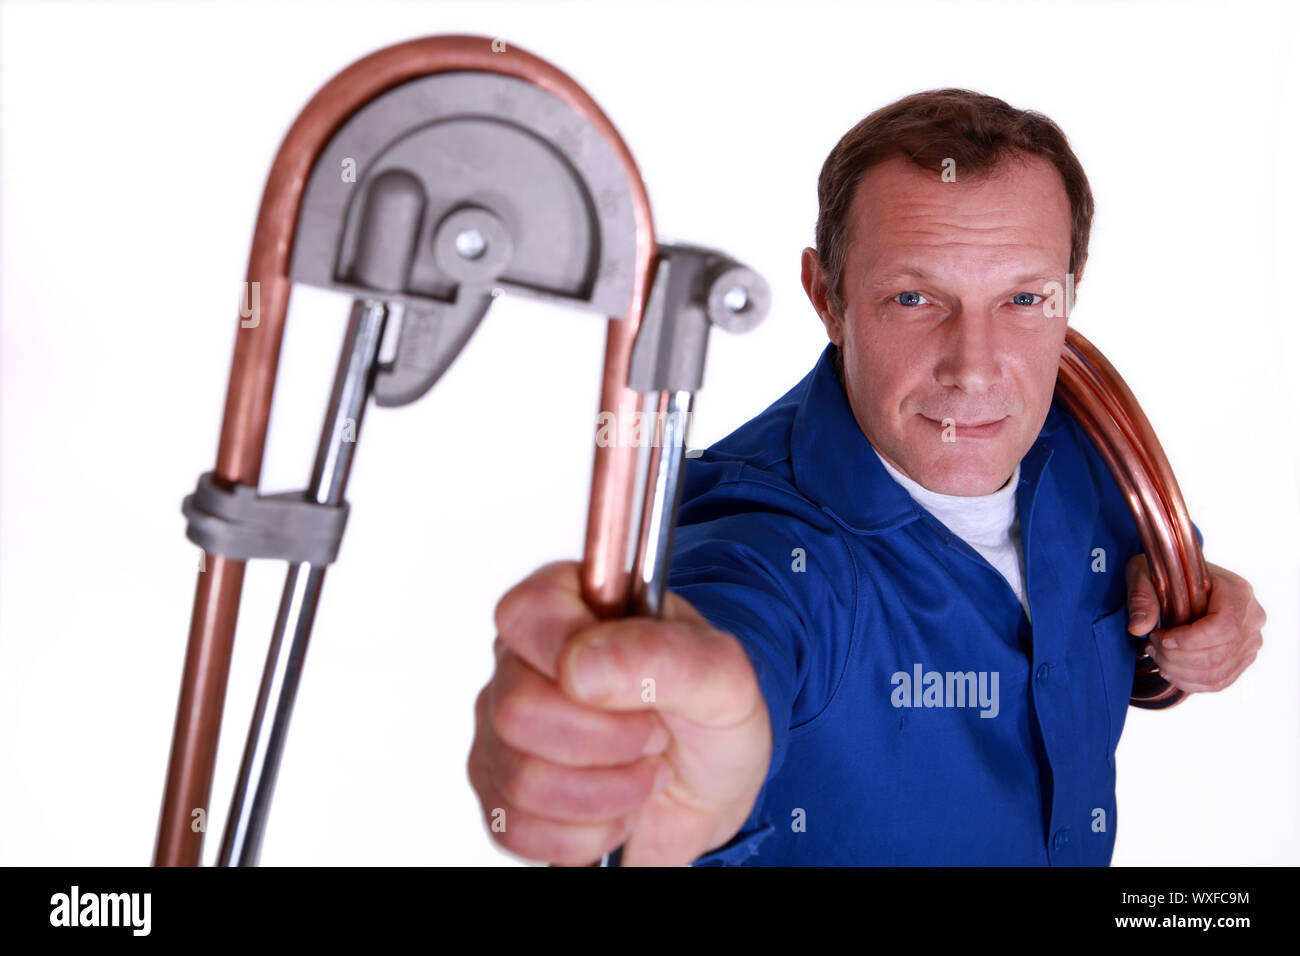 Plumber bending copper piping Stock Photo